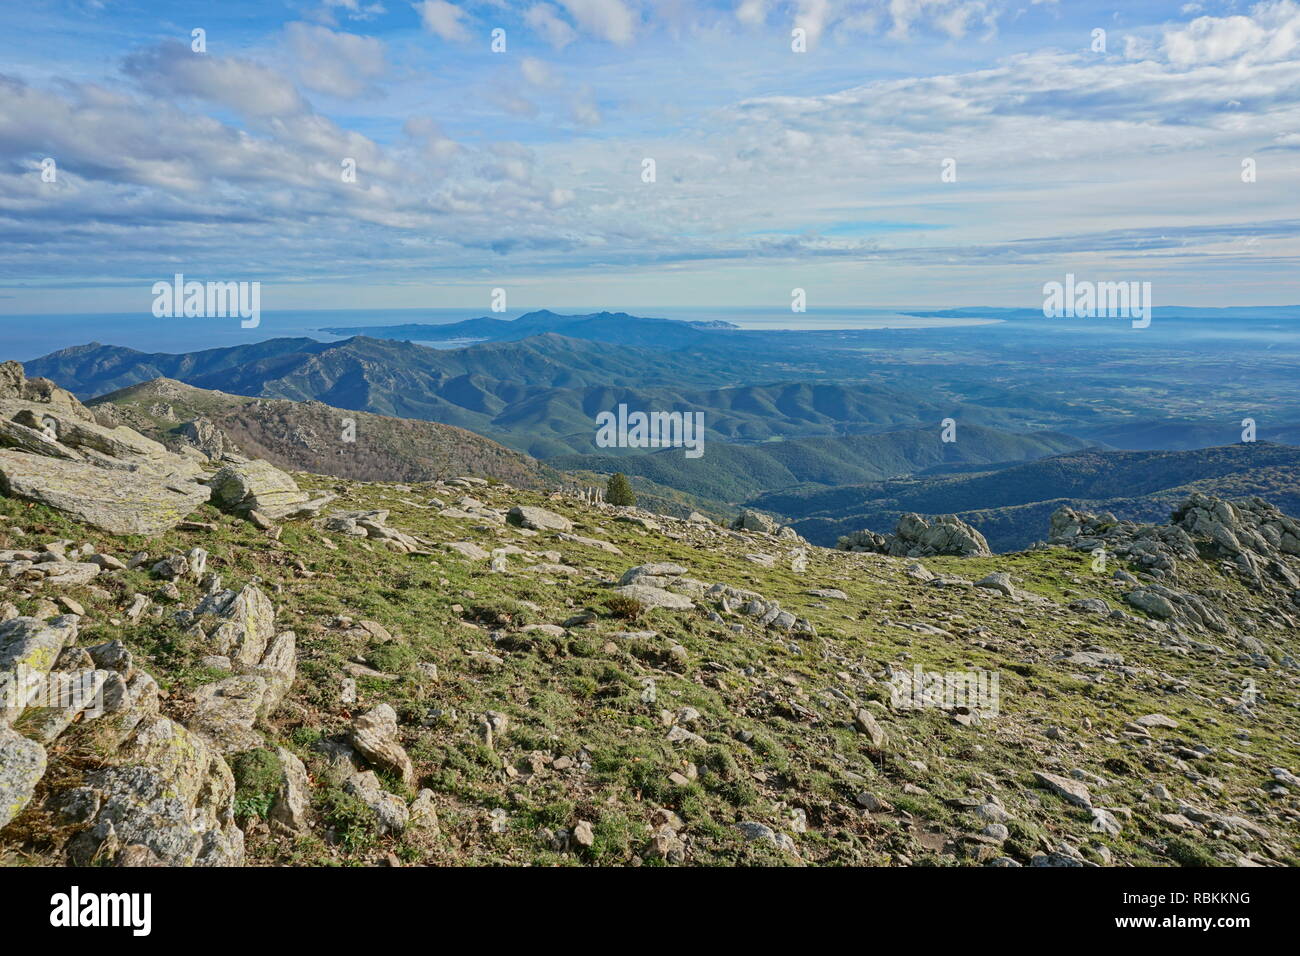 Landscape from the Albera mountain at the border between Spain and France with the Mediterranean sea and the gulf of Rosas in background, Pyrenees Stock Photo